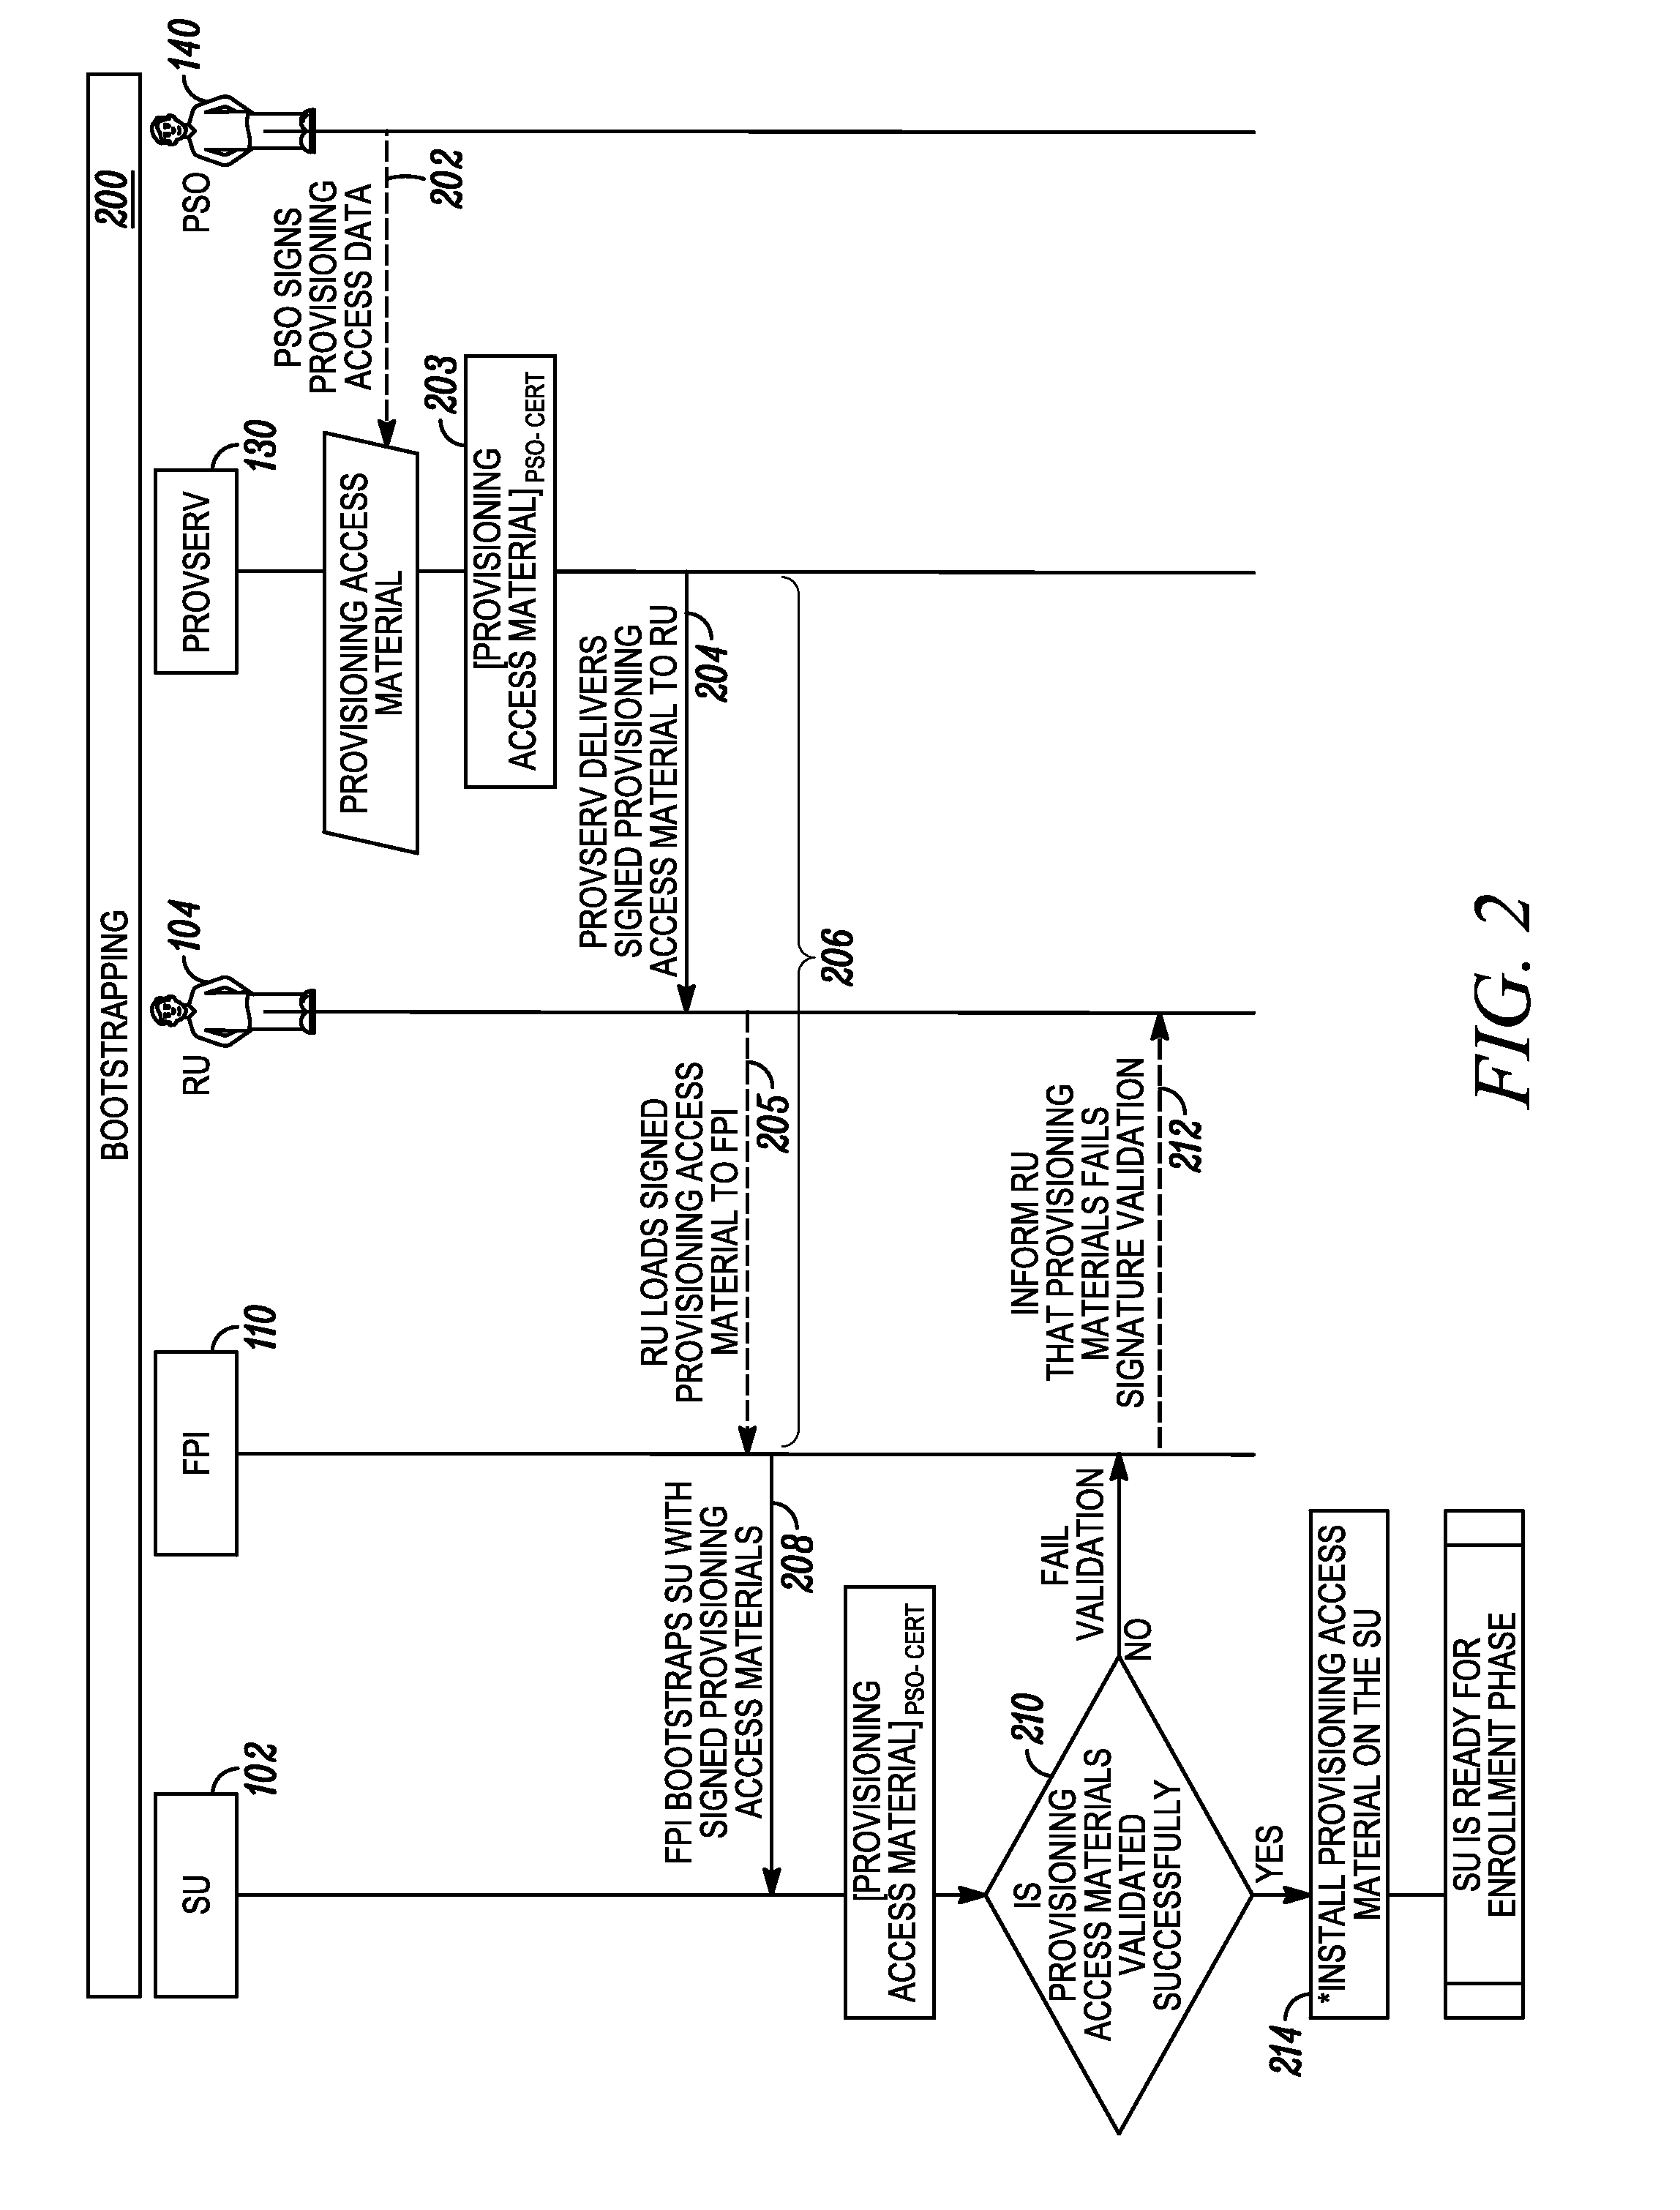 Method to enable secure self-provisioning of subscriber units in a communication system